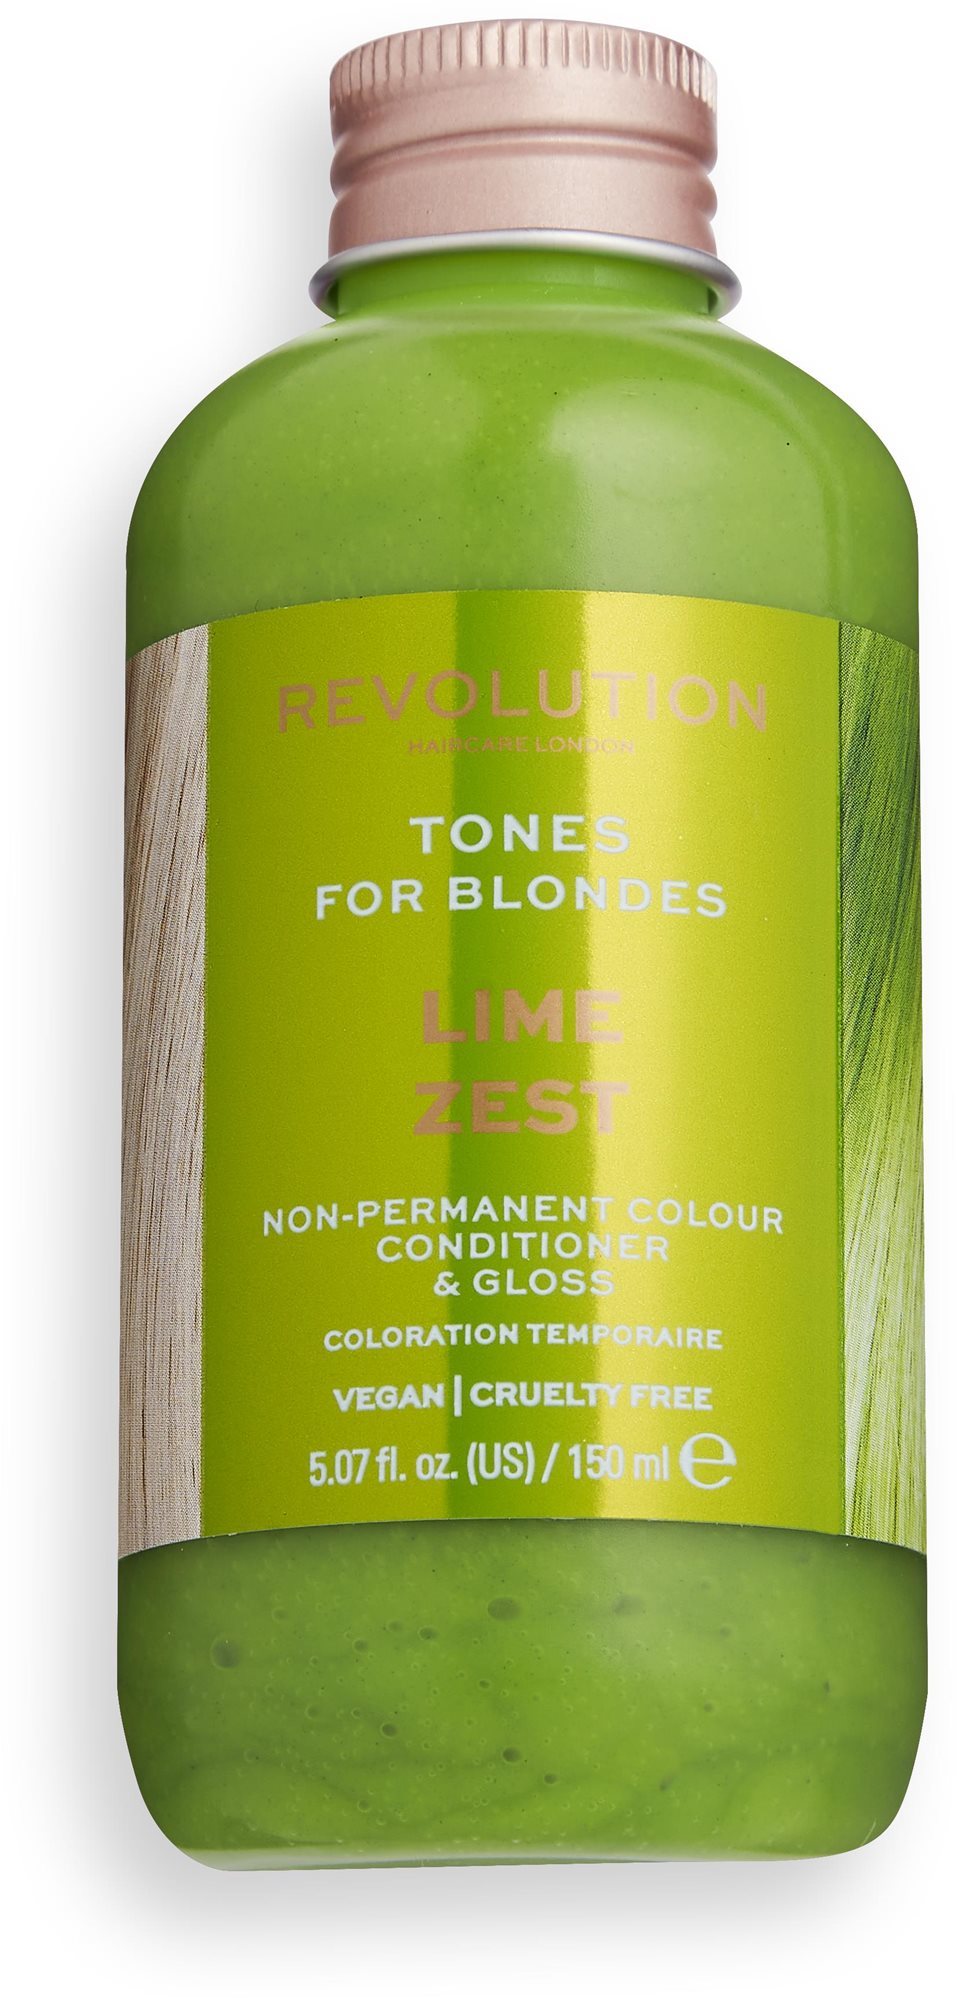 REVOLUTION HAIRCARE Tones for Blondes Lime Zest 150 ml